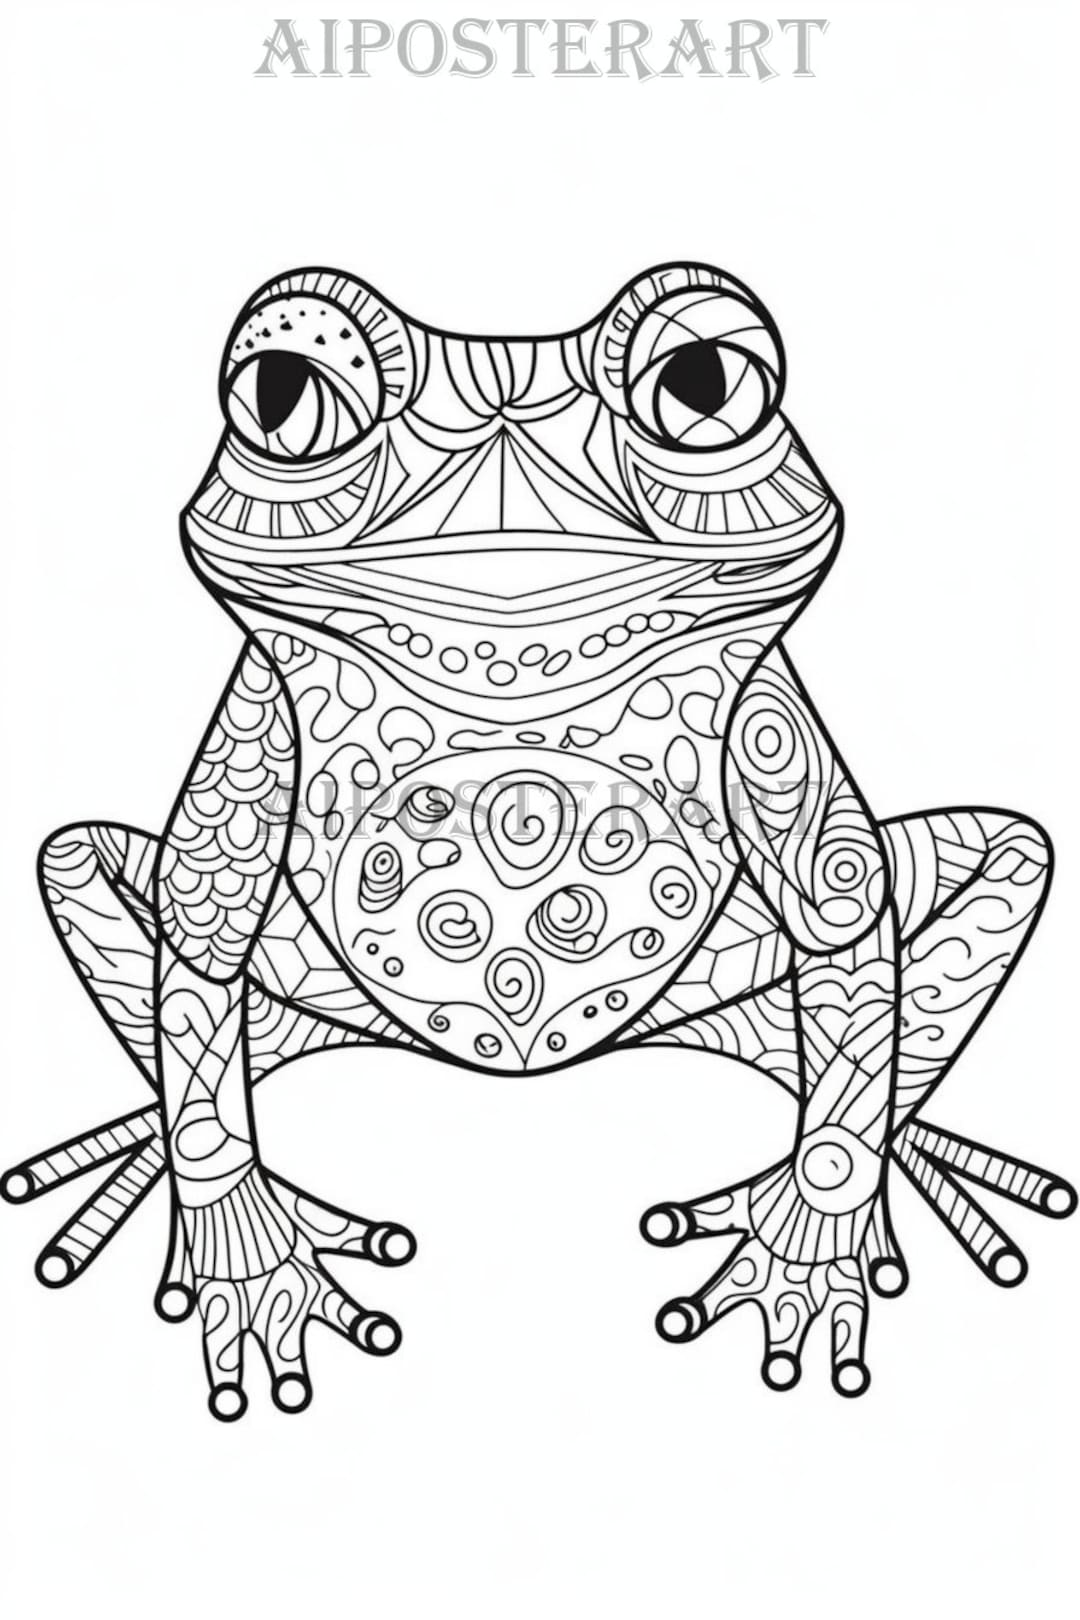 Cute cartoon patterned frog coloring sheet for adults kids printable coloring page mid